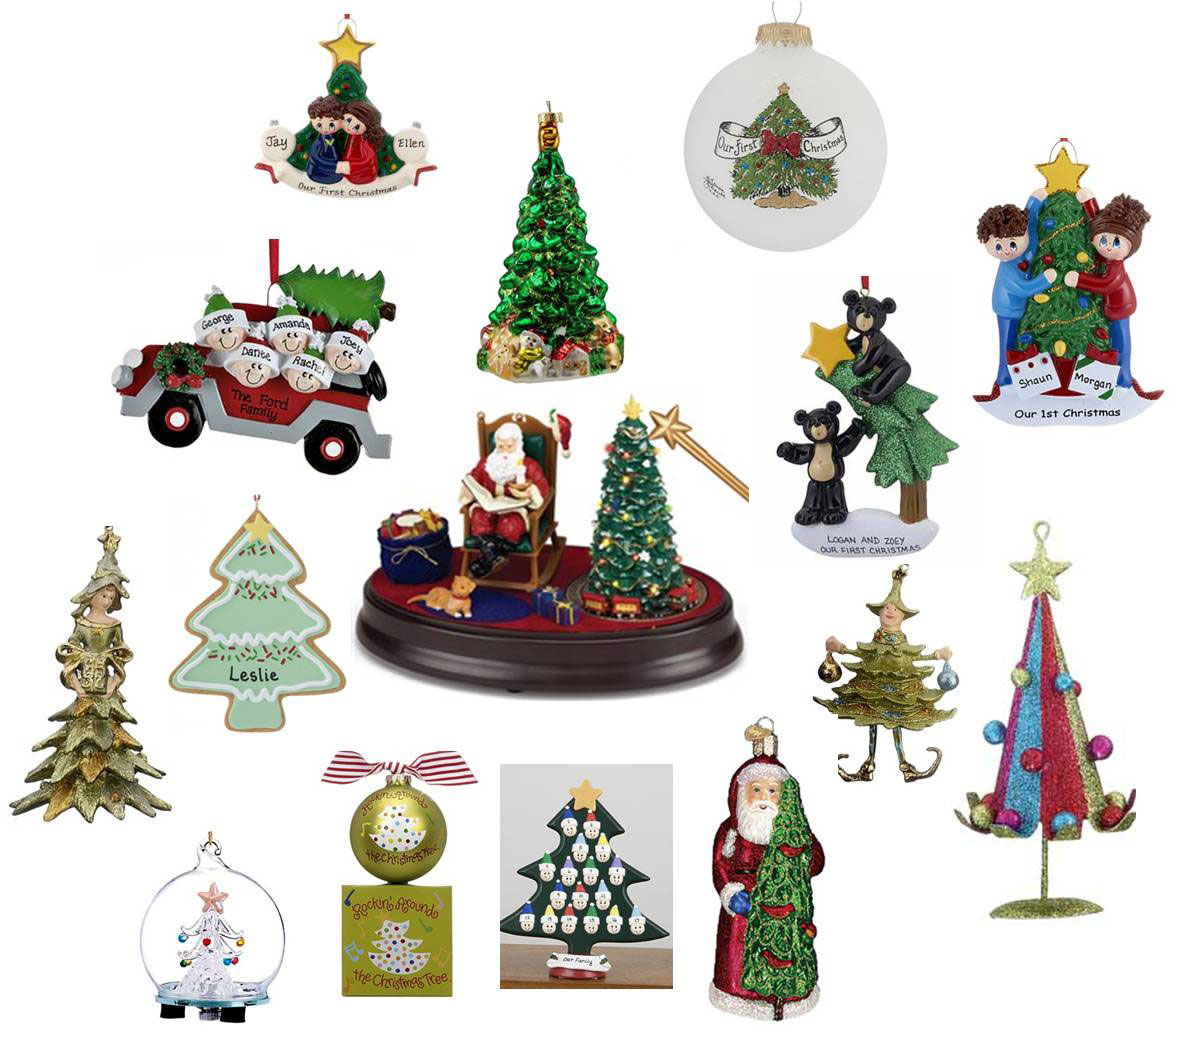 A collection of Christmas Tree Ornaments found at OrnamentShop.com all featuring the Christmas tree in unique ways for your home. | OrnamentShop.com